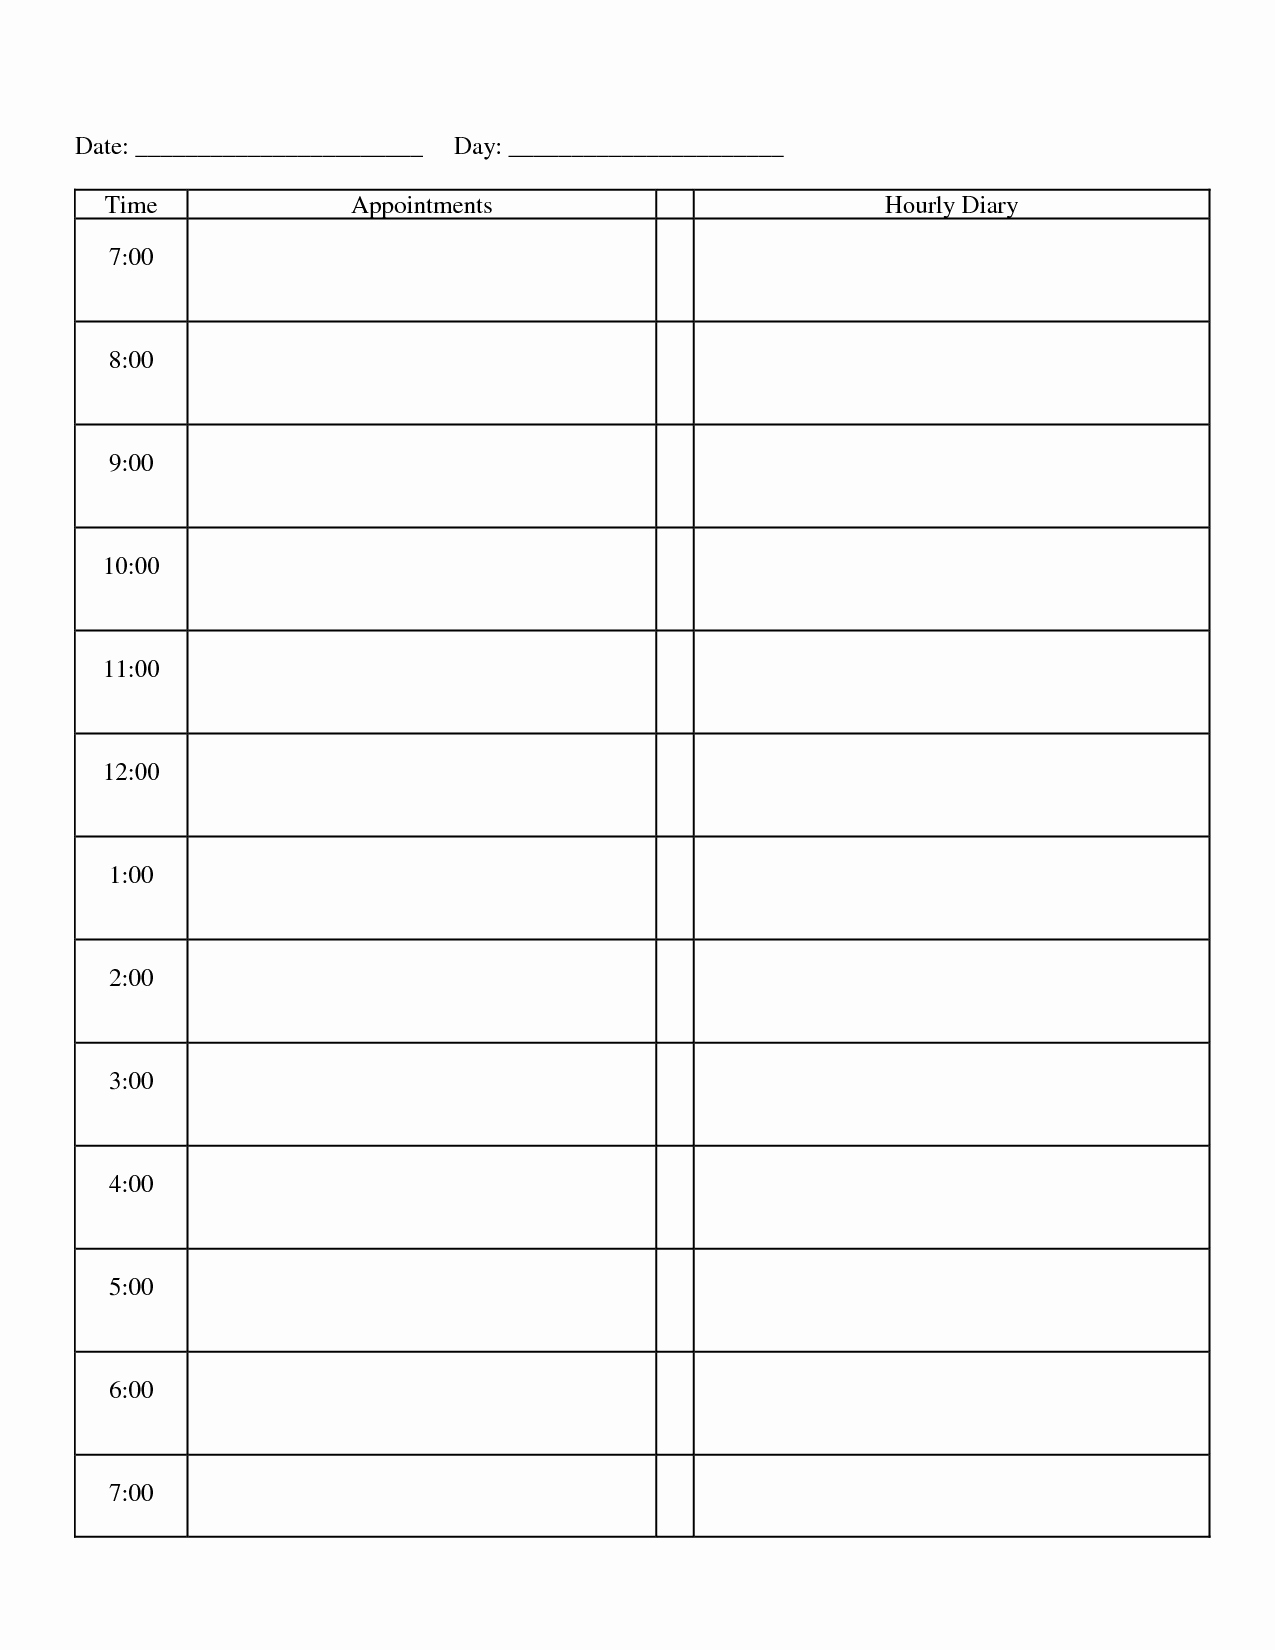 Daily Homework assignment Sheet Template New Best S Of Appointment Tracking Sheet Free Printable